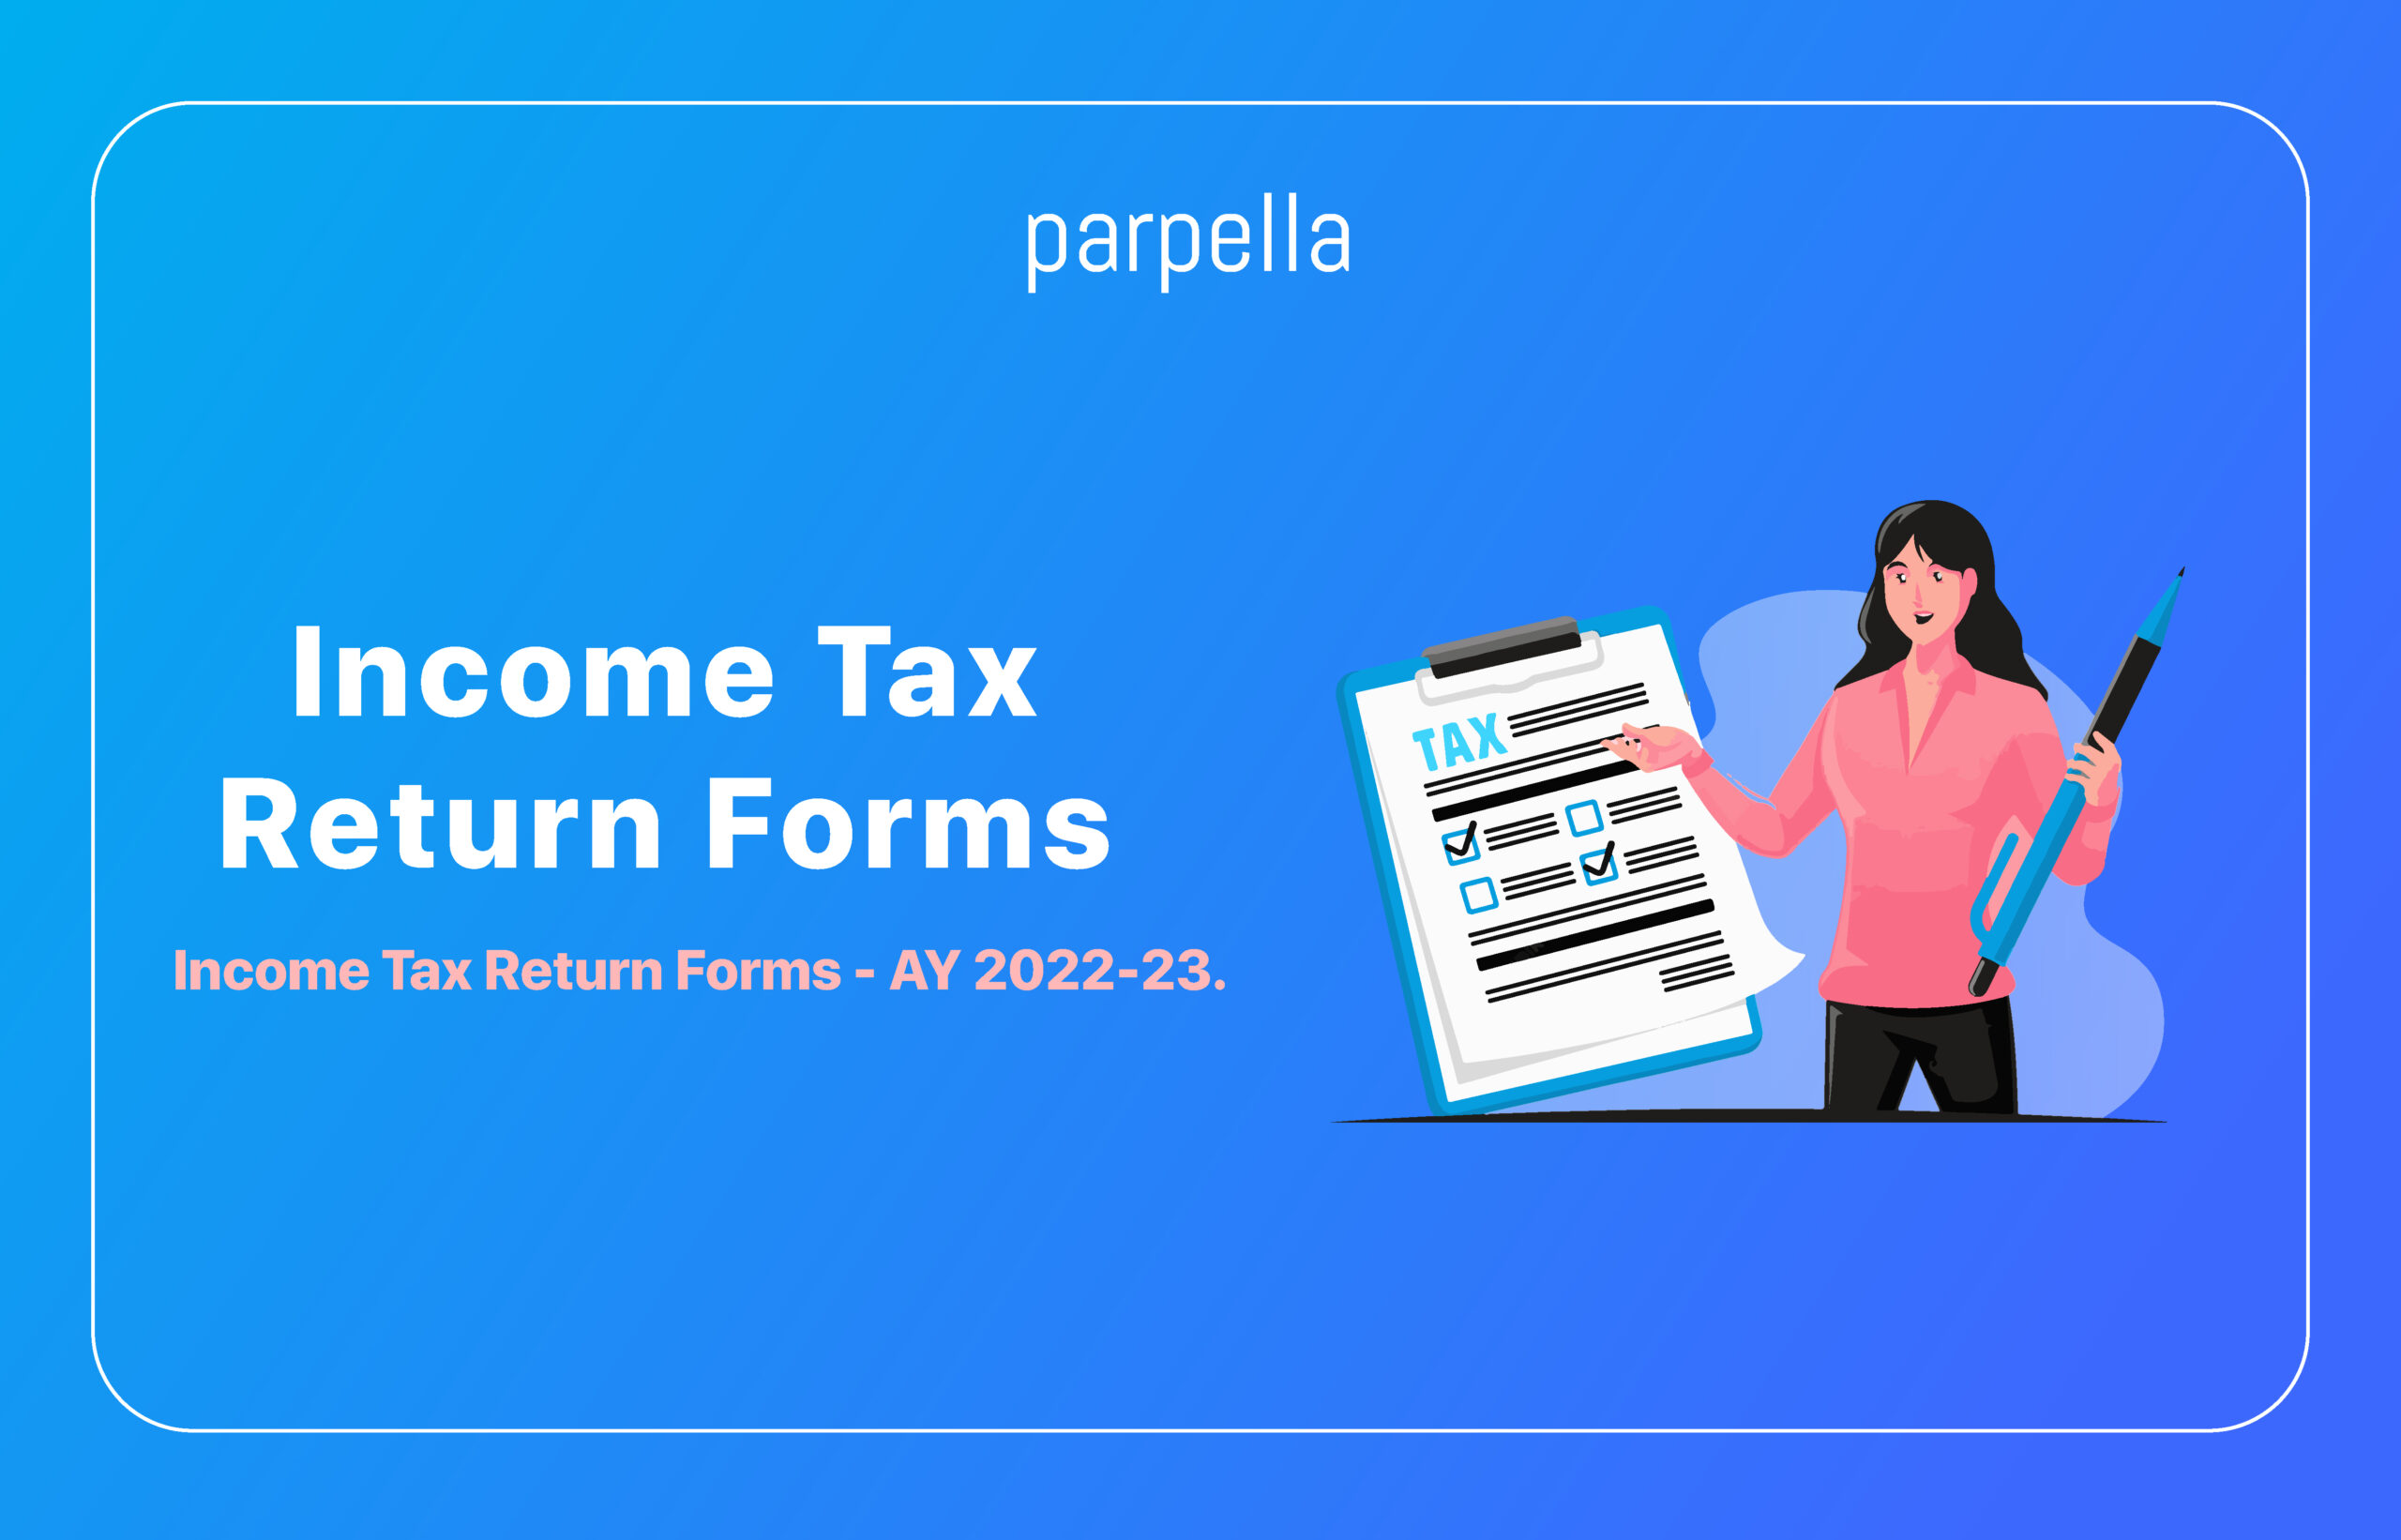 Download Income Tax Return Form – AY 2022-23